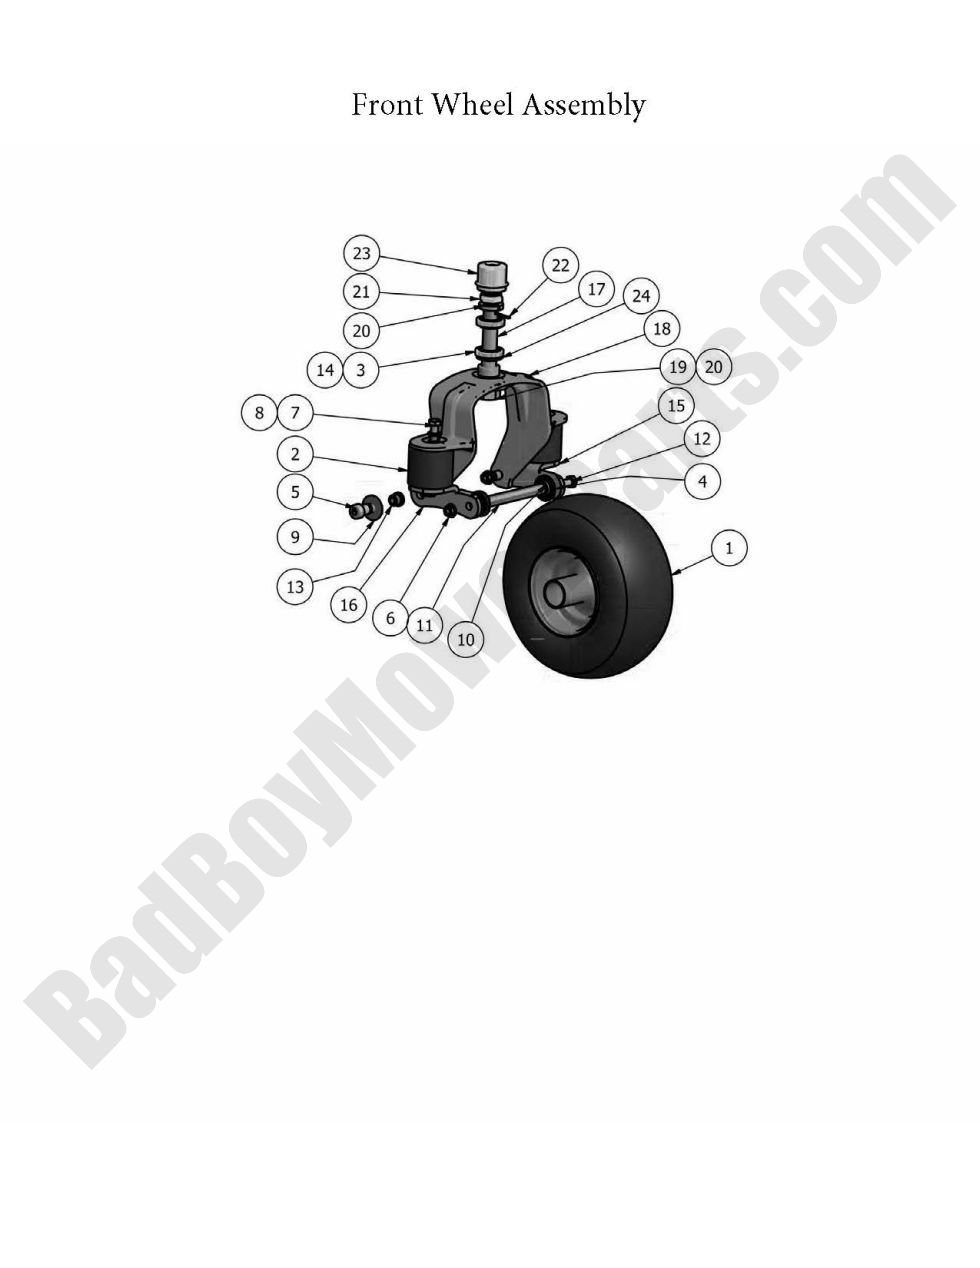 2010 AOS Diesel Front Wheel Assembly